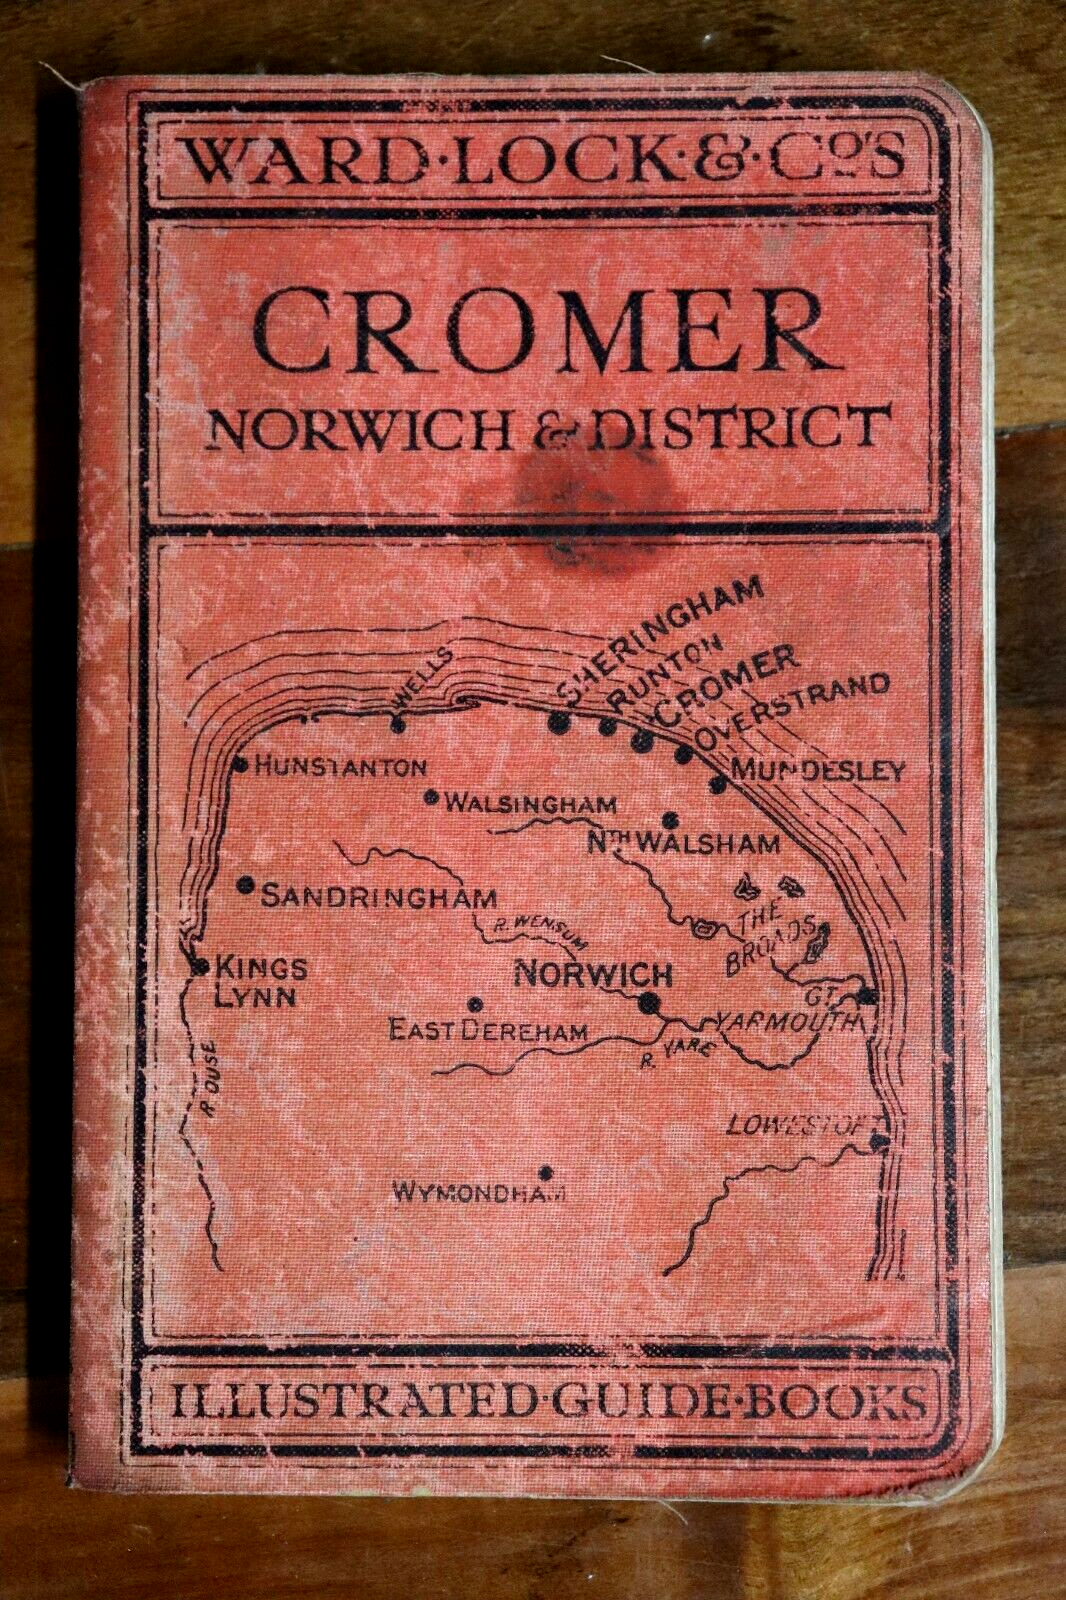 Guide To Cromer: Ward Lock & Co - c1925 - Antique Travel Guide Book w/Maps - 0